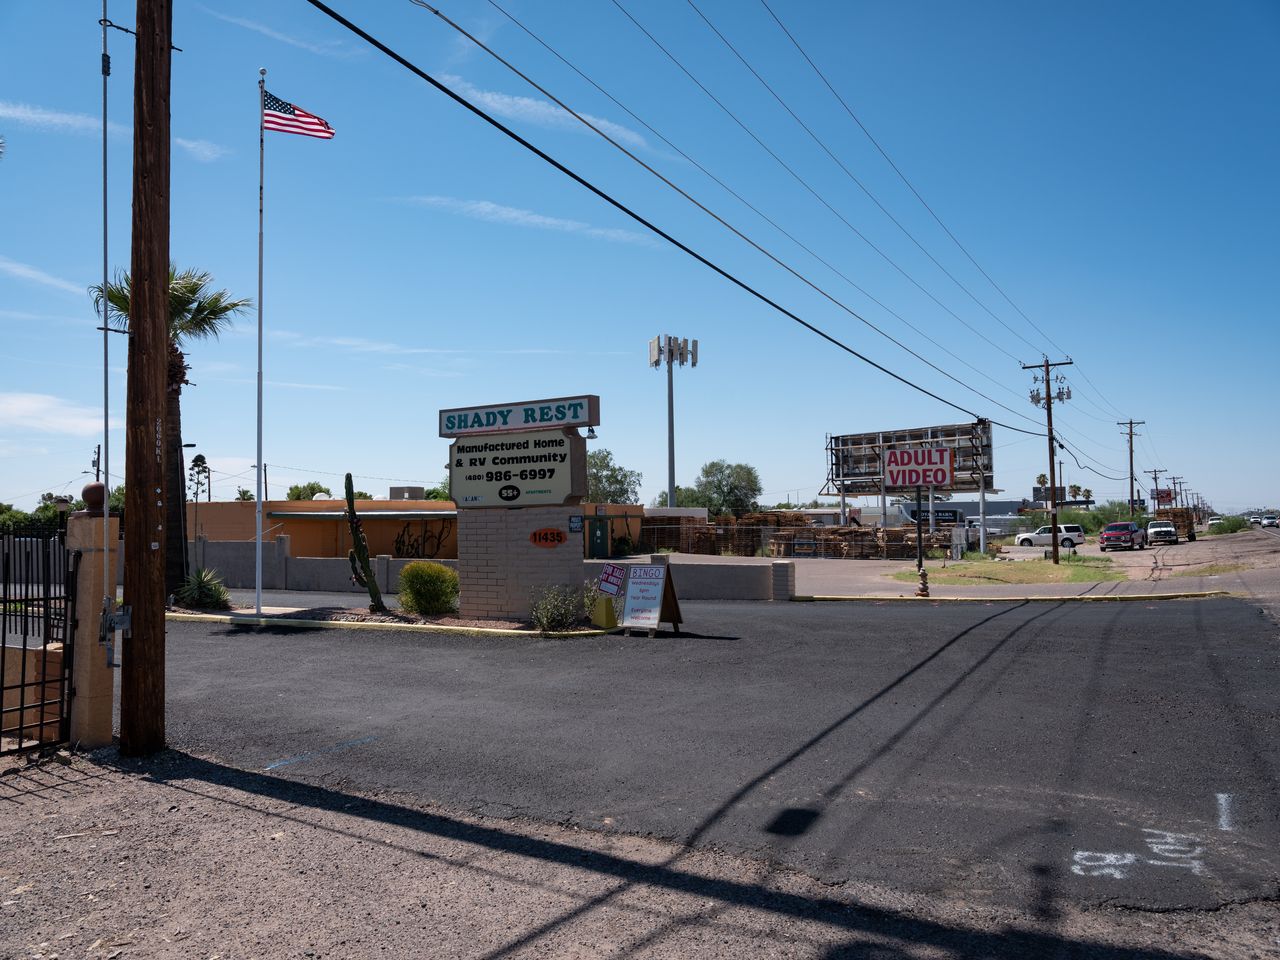 An adult video shop is conveniently located next to a 55+ retirement RV community in Apache Junction, Arizona.